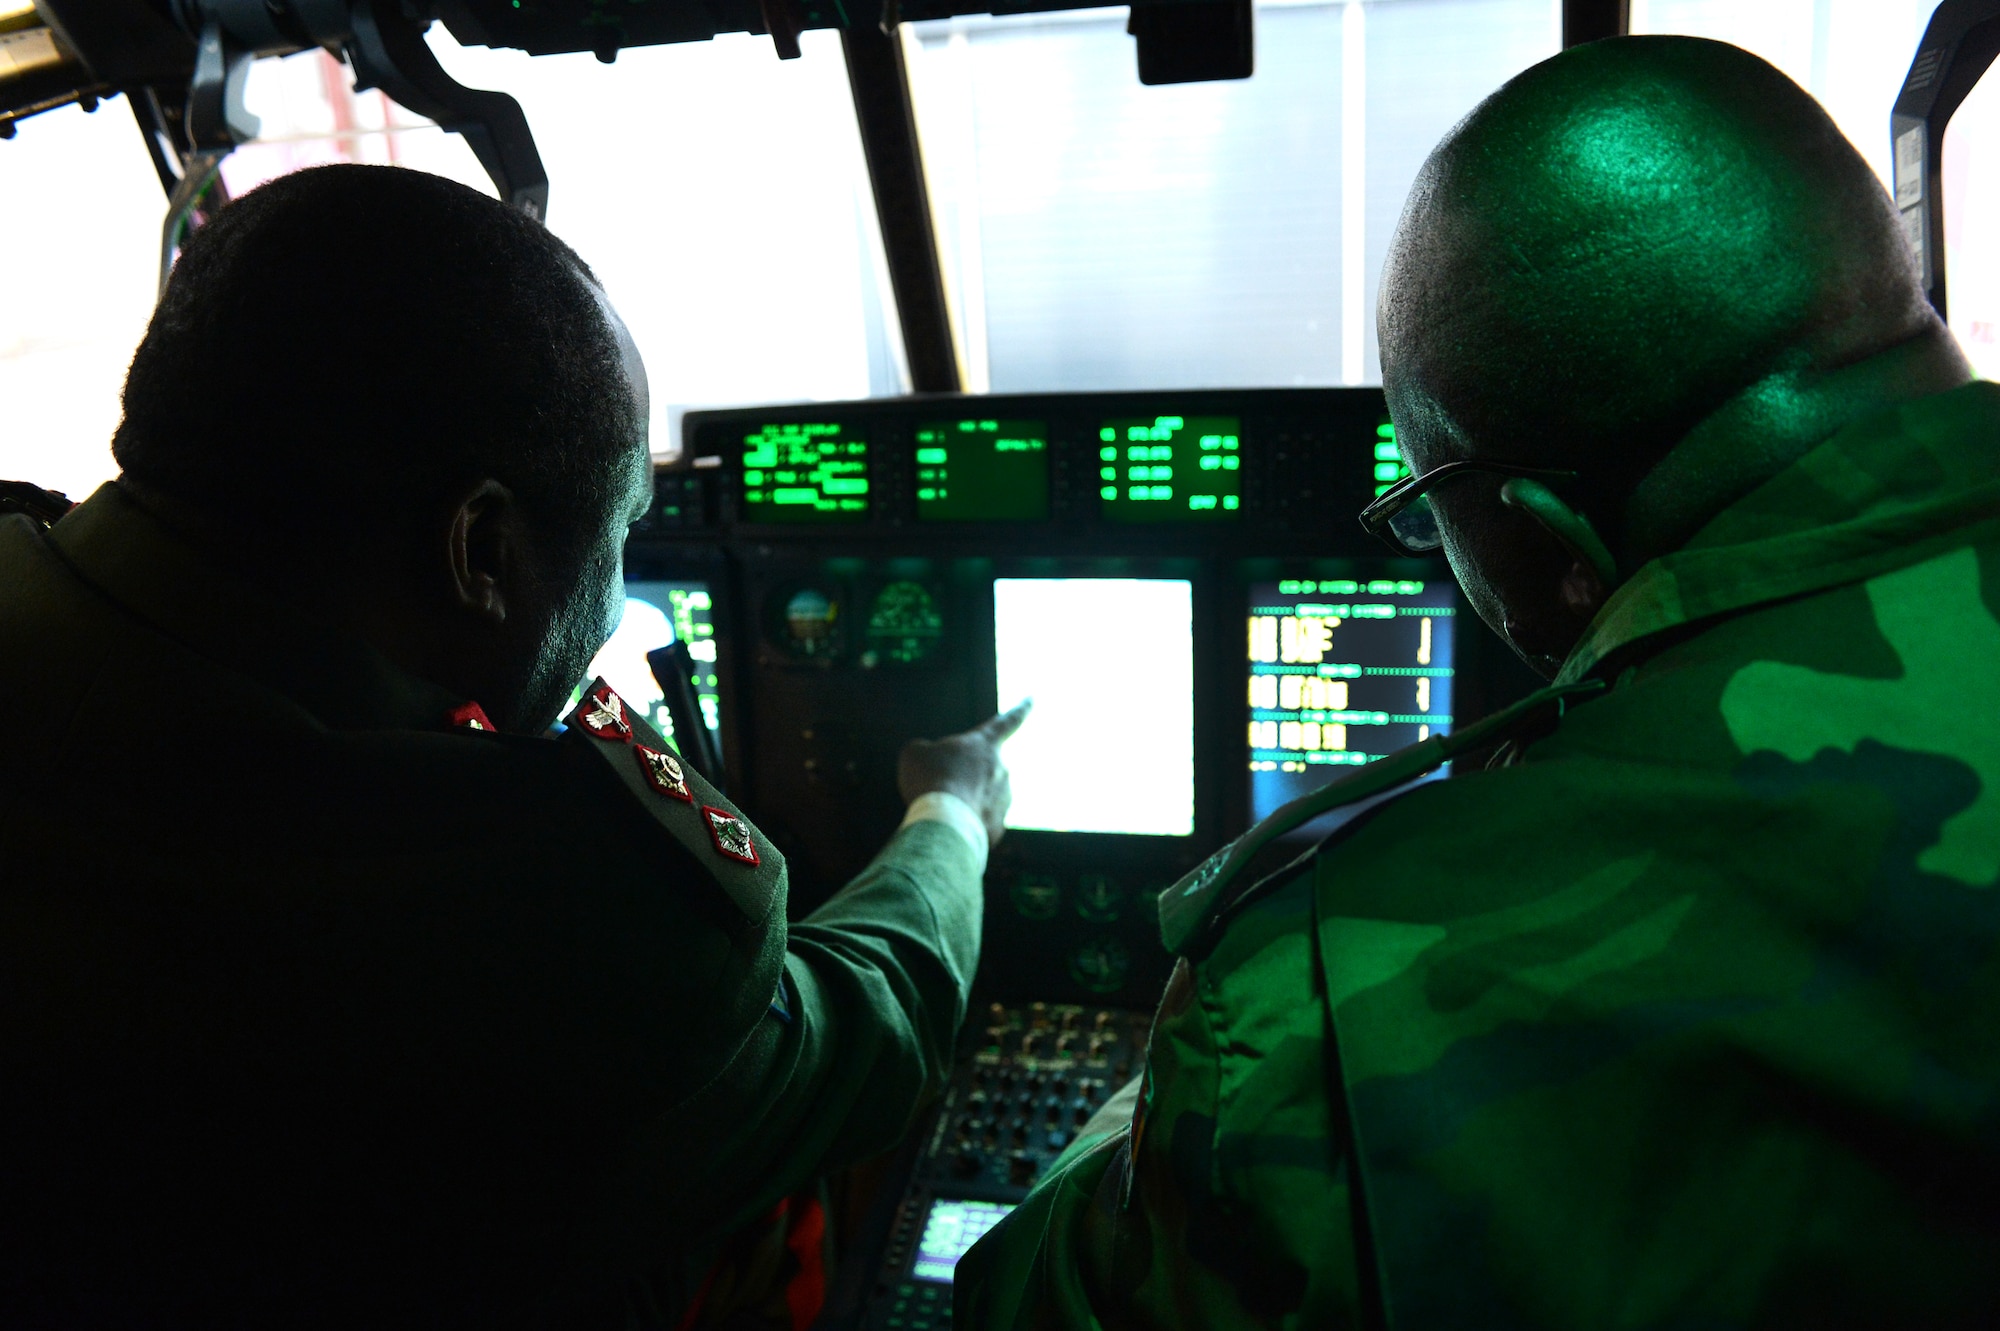 Members of the Zambian air force tour a C-130 J Super Hercules flight deck, April 29, 2013, Ramstein Air Base, Germany. The visit gave the Zambian air force a chance to further military relations and improve the partnership between the U.S. and Zambian air forces. (U.S. Air Force photo/Senior Airman Caitlin O’Neil-McKeown)